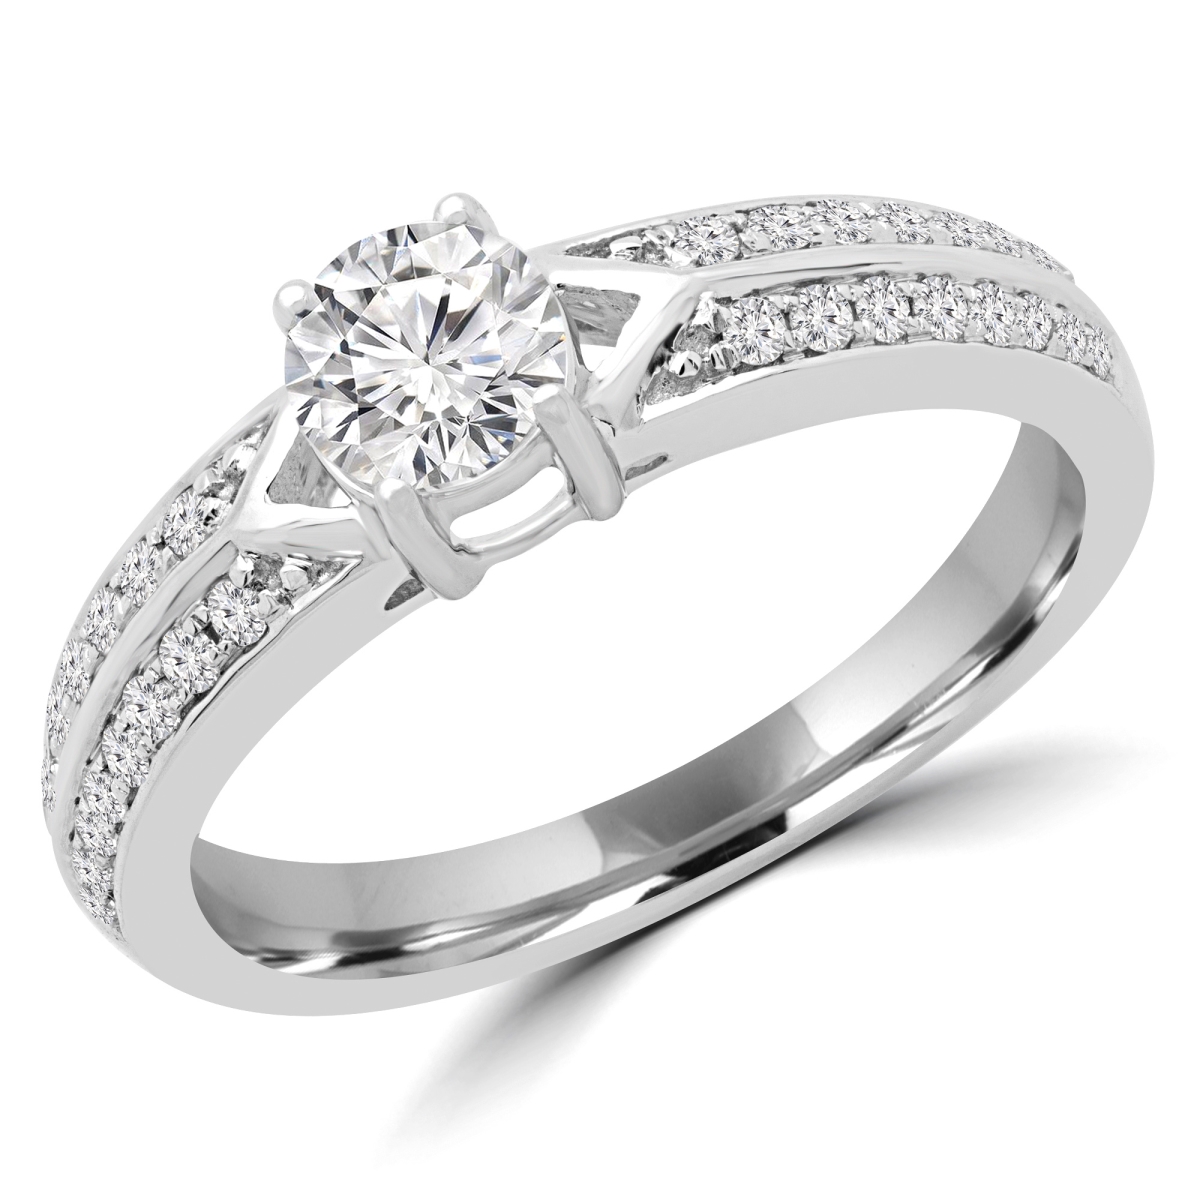 Picture of Majesty Diamonds MD180577-P 0.62 CTW Round Diamond Solitaire with Accents Engagement Ring in 14K White Gold